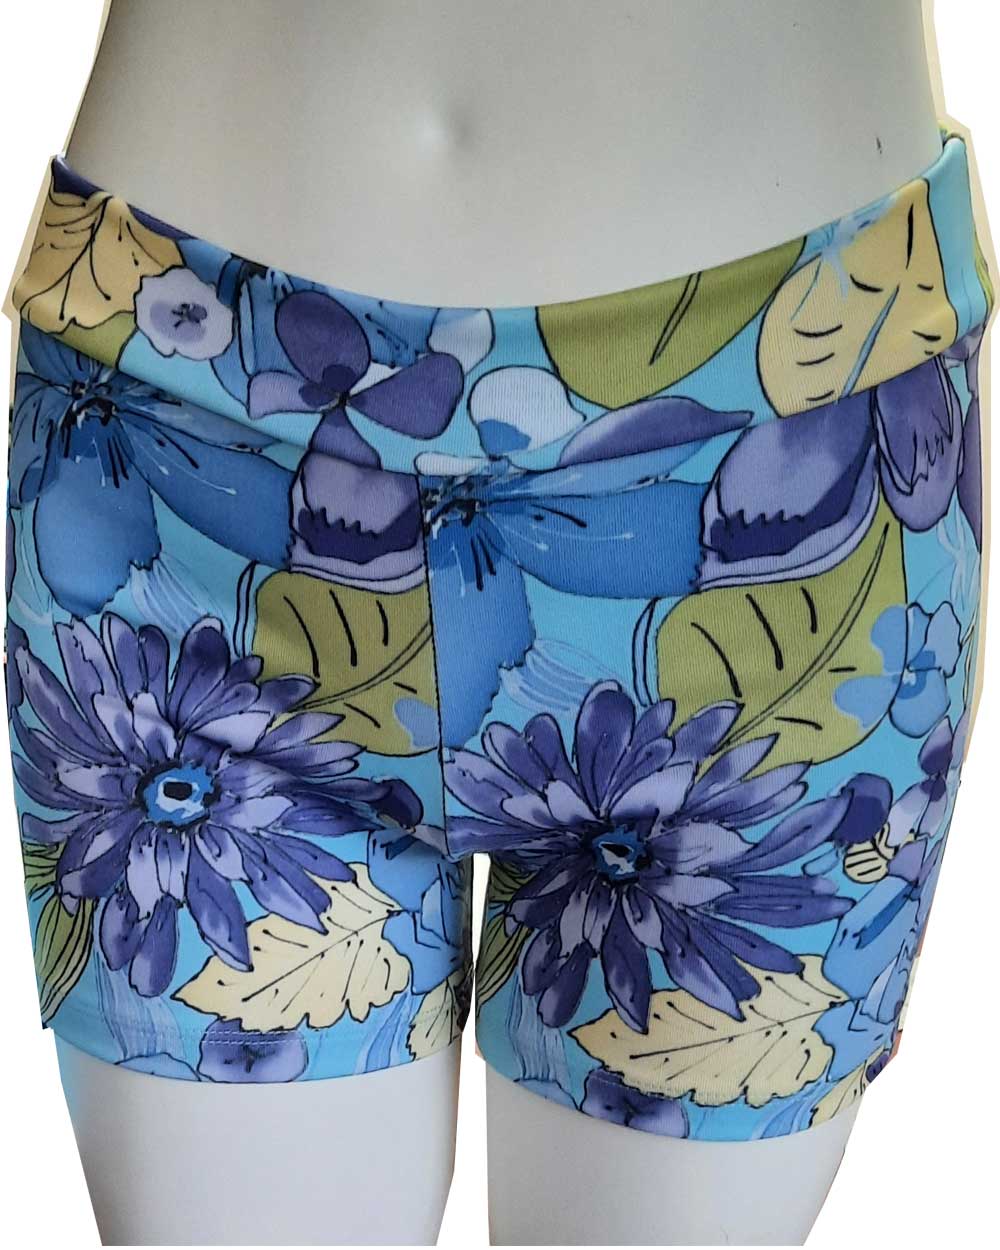 Floral yoga shorts meant for hot yoga yet worn anytime, anywhere!